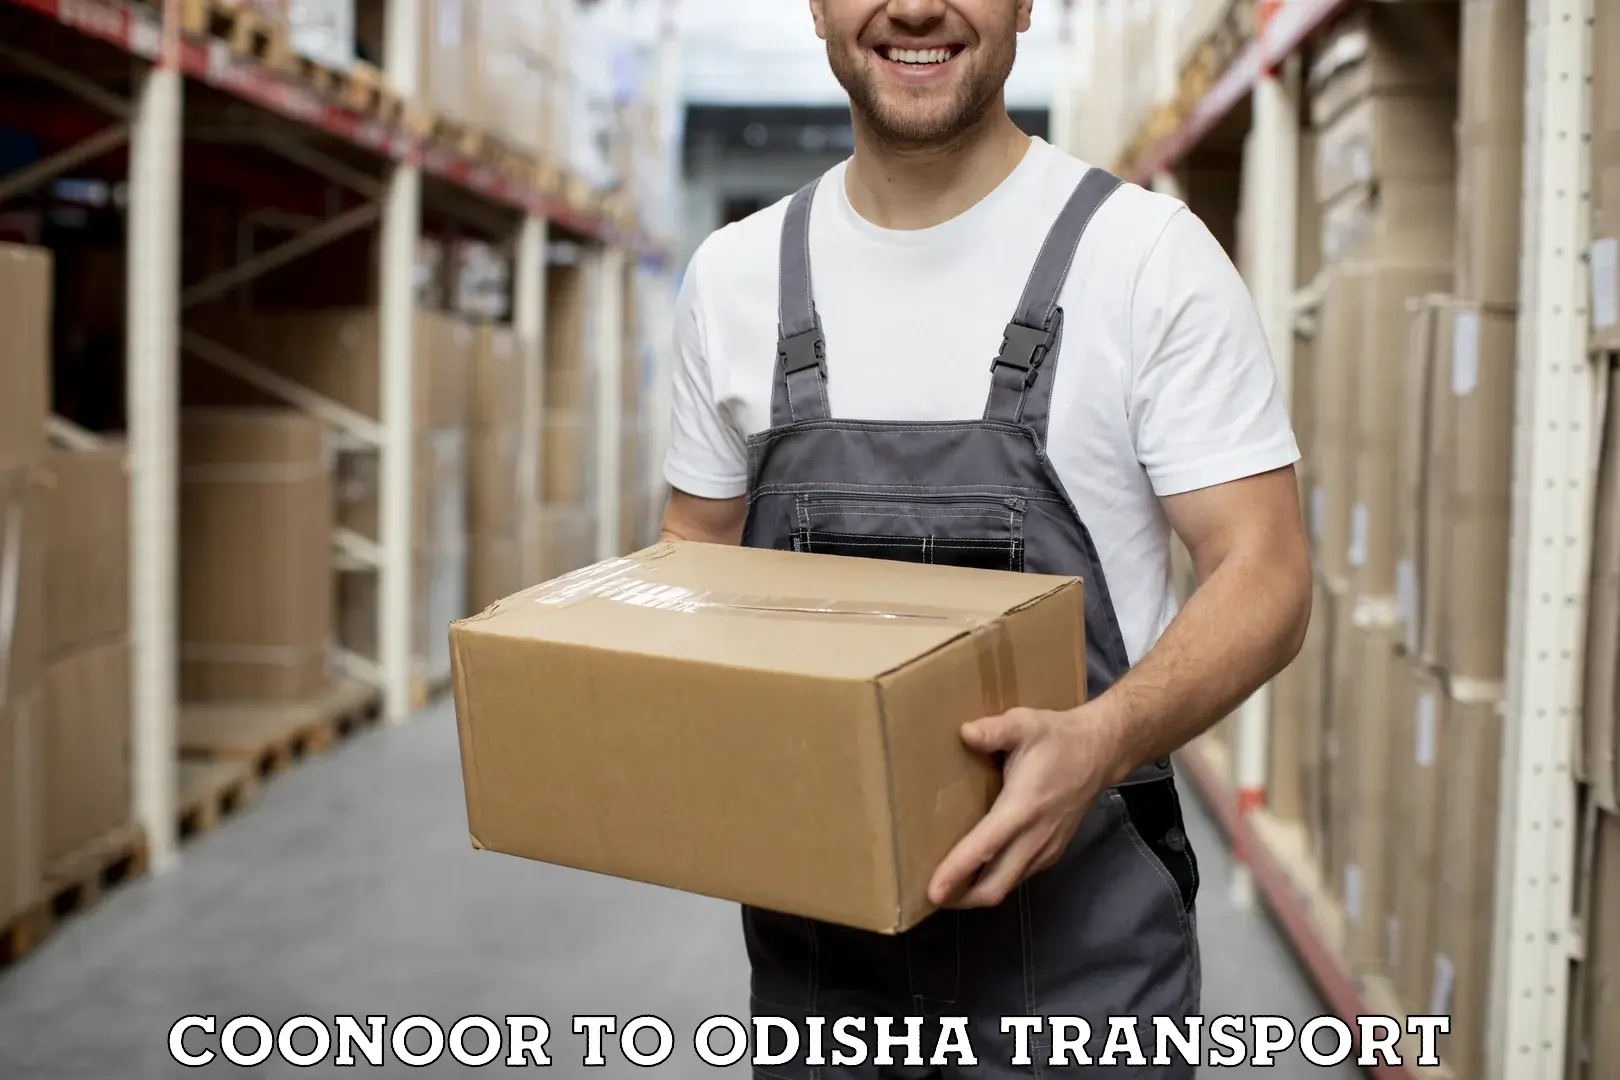 Shipping partner Coonoor to Anandapur